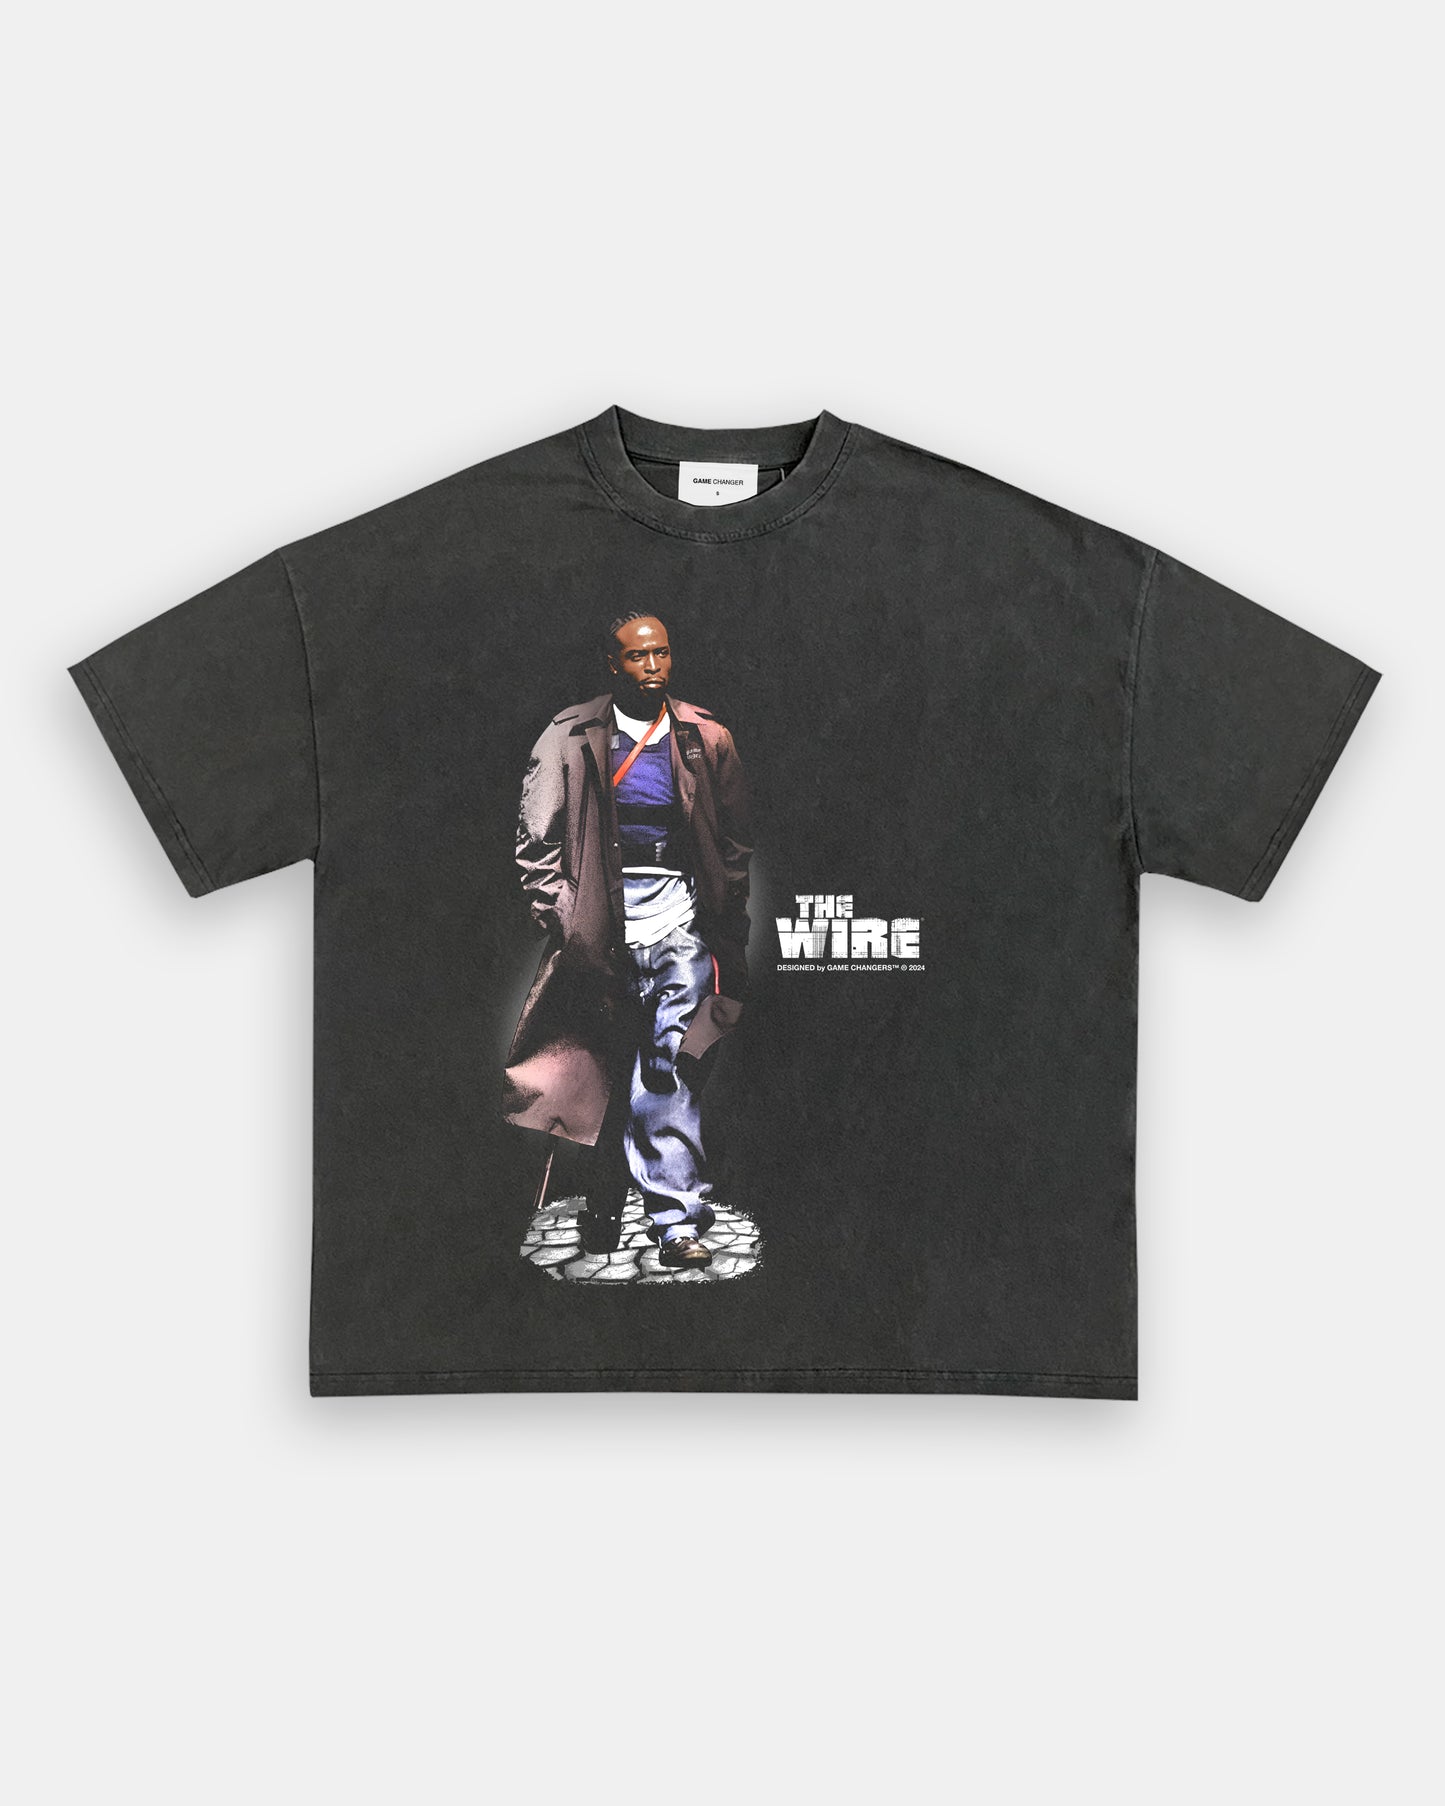 THE WIRE V2 TEE